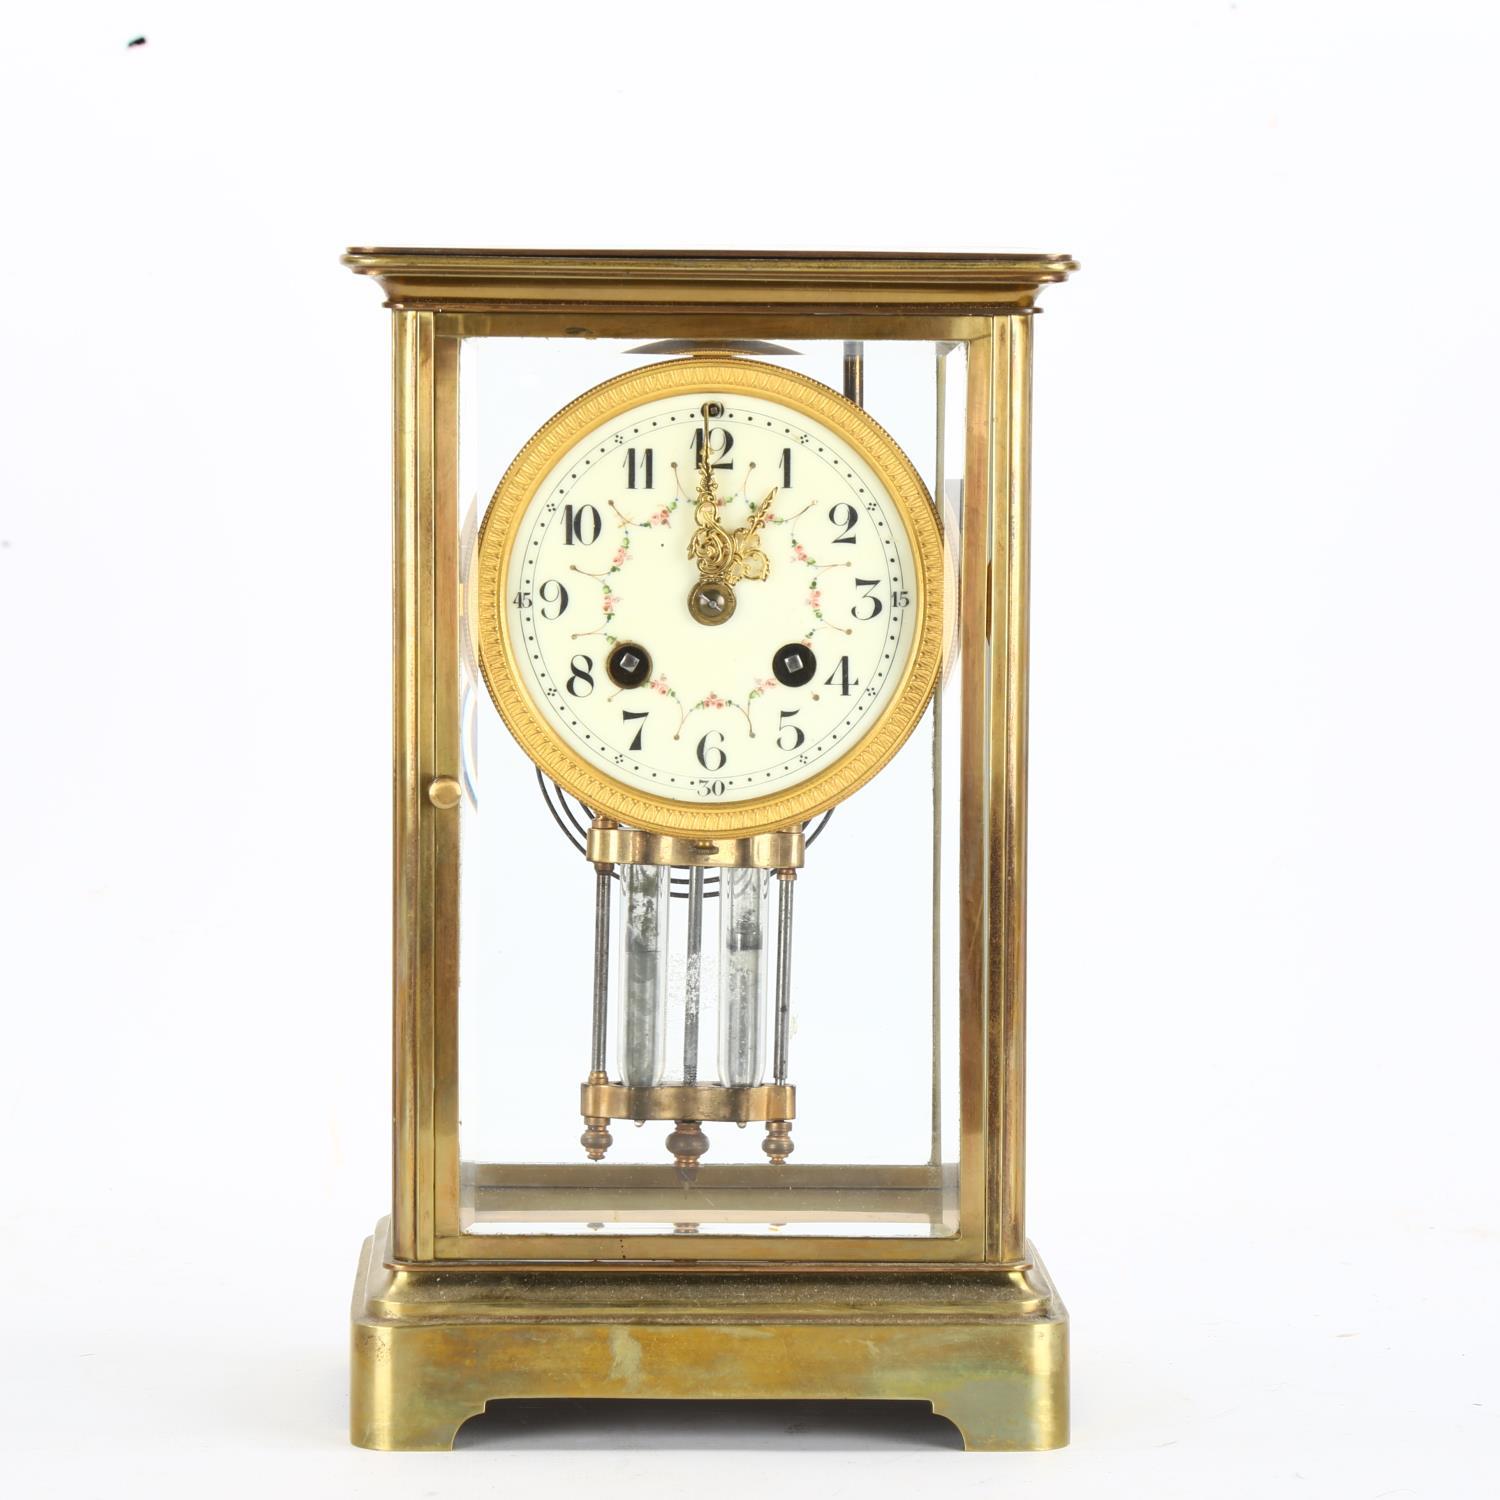 An early 20th century brass 4-glass 8-day mantel clock, hand painted white enamel dial with Arabic